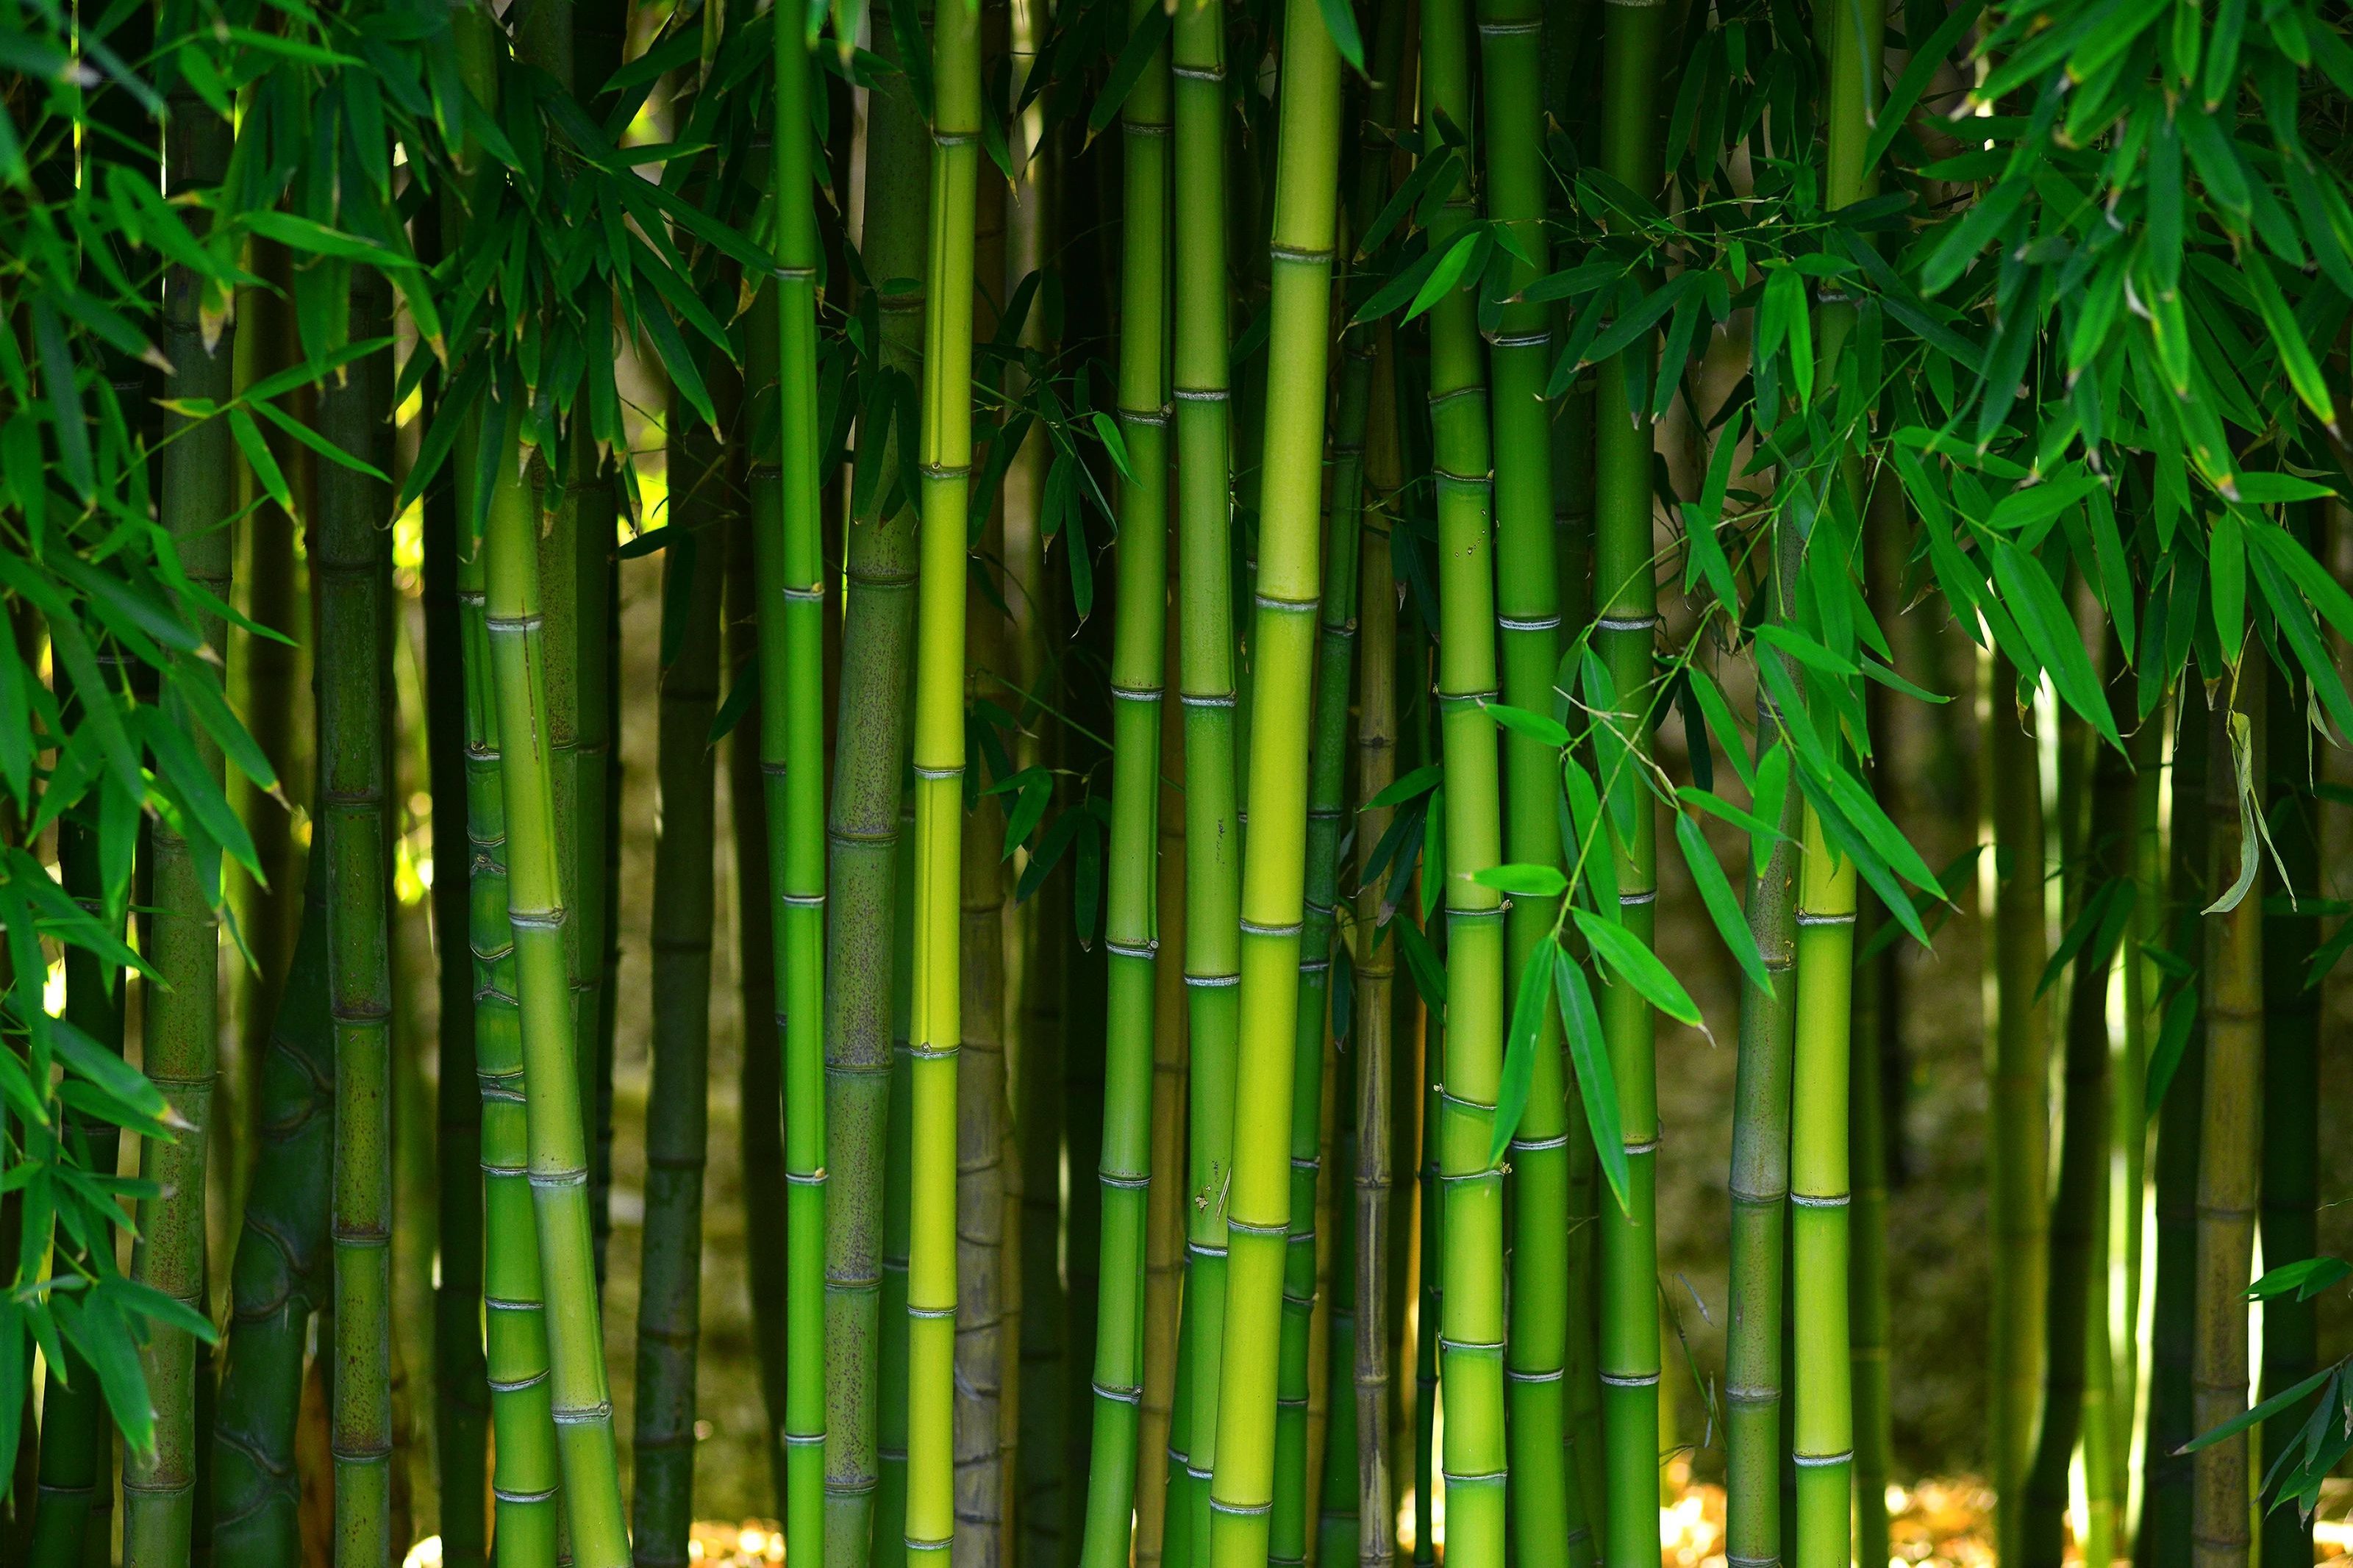 bamboo forest image | Canyon Floor Corporation